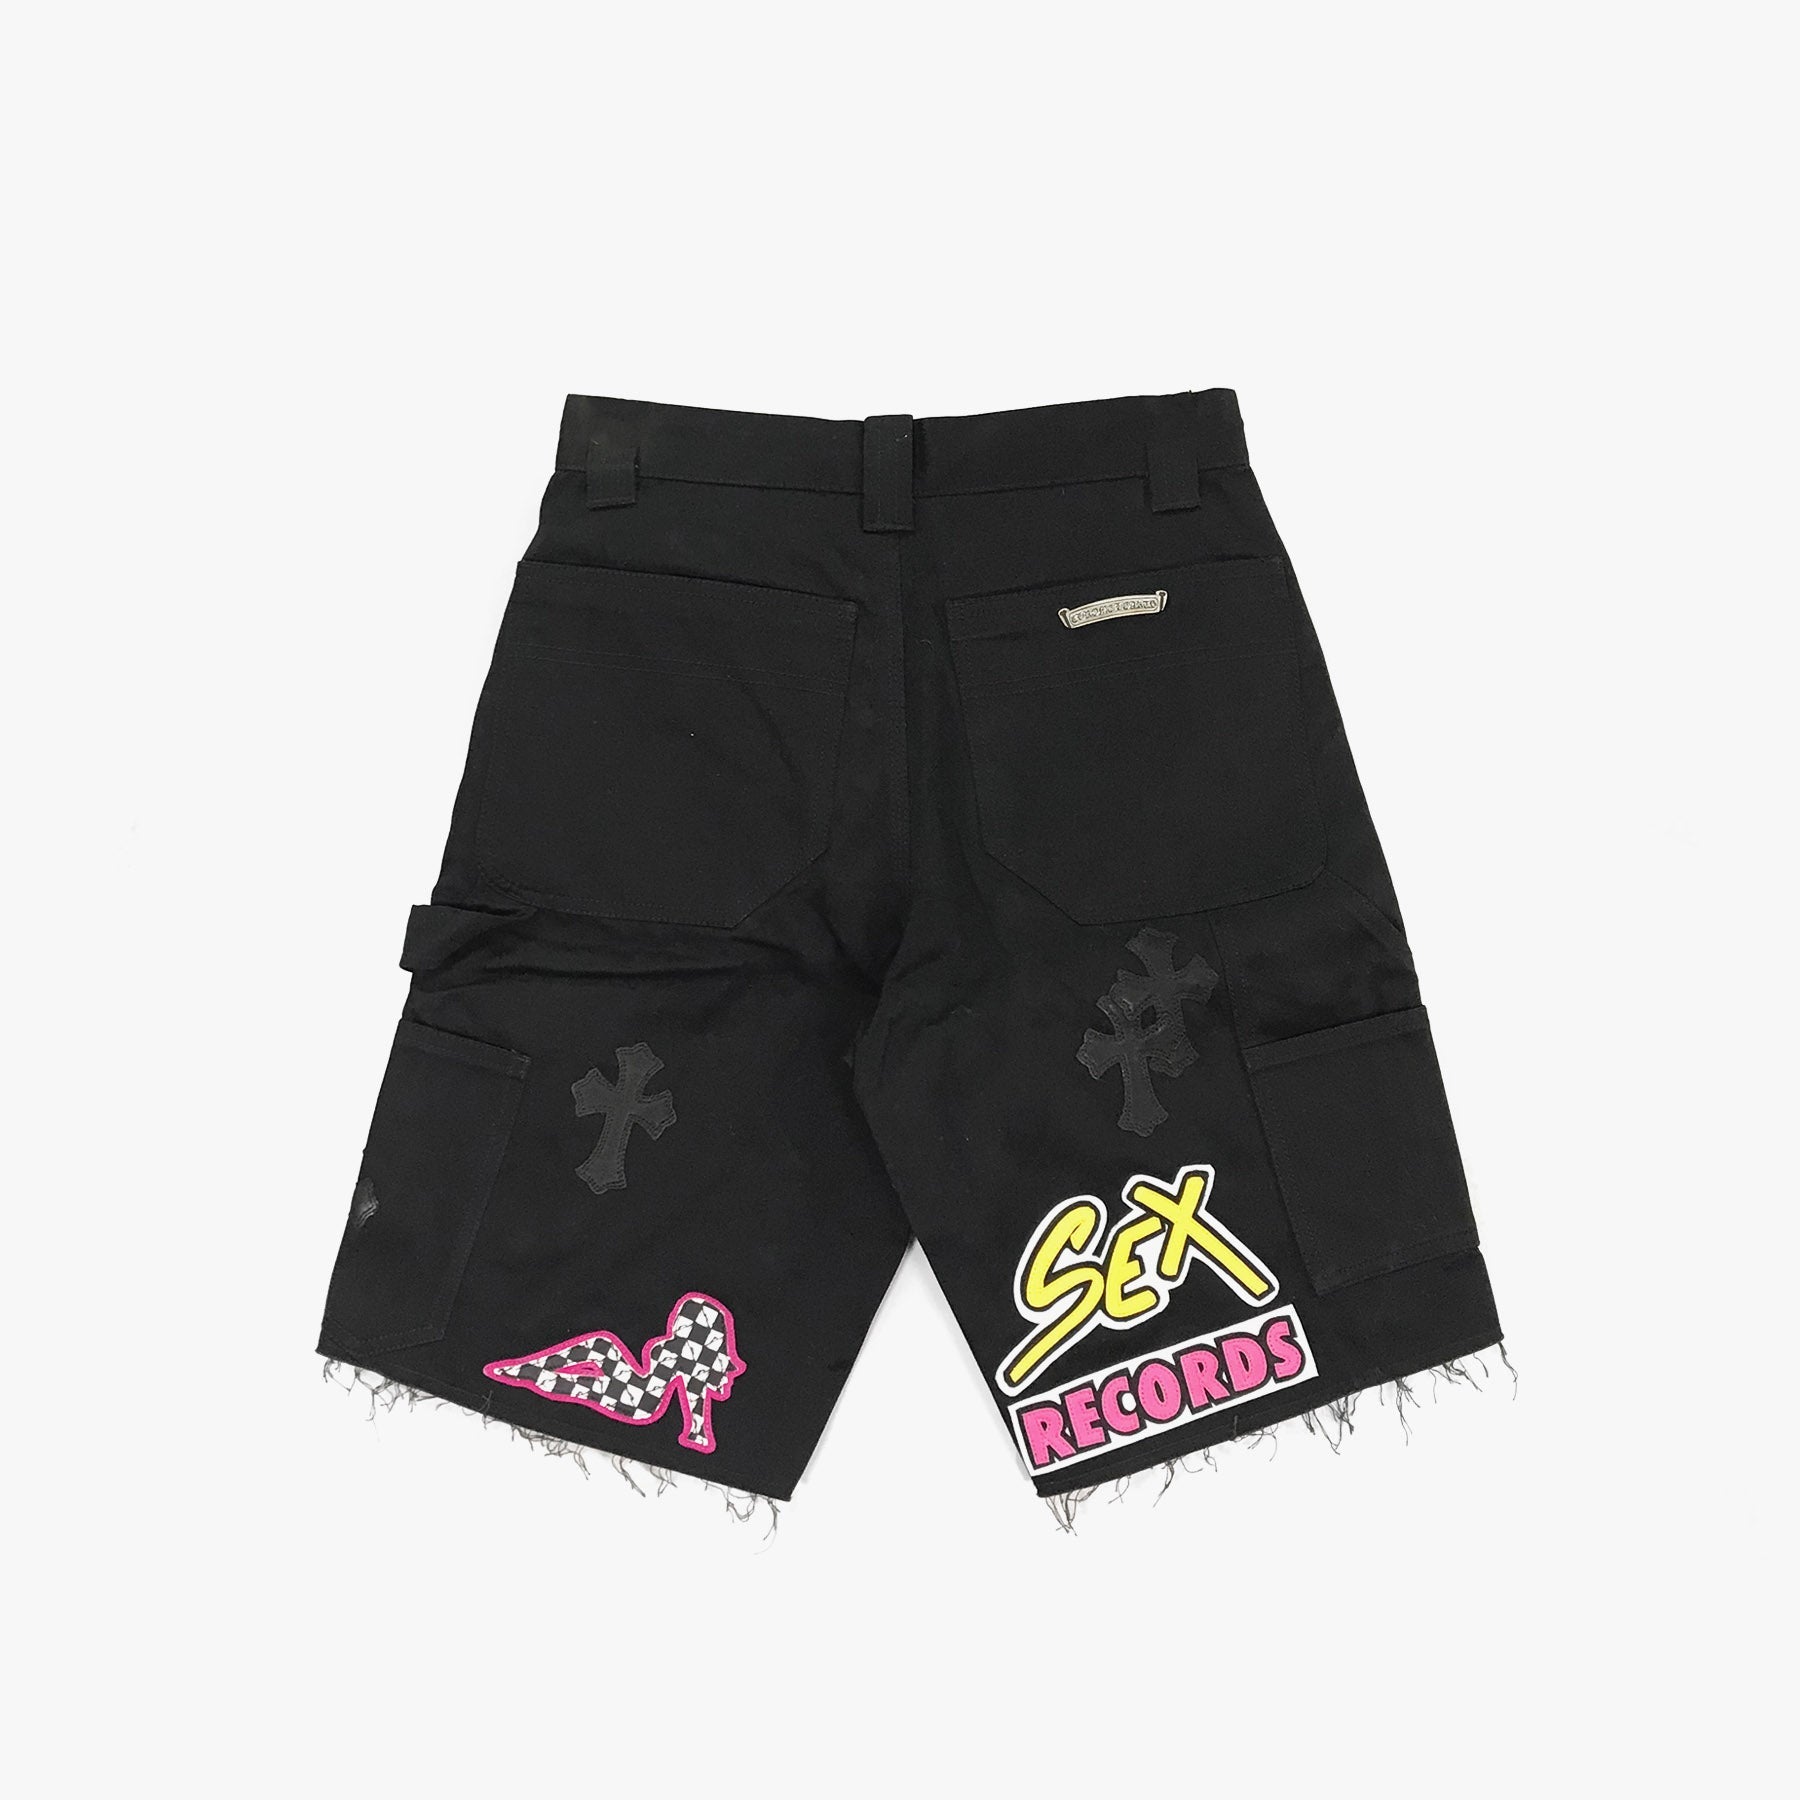 Chrome Hearts Matty Boy Sex Record SPACE Leather Patch Shorts